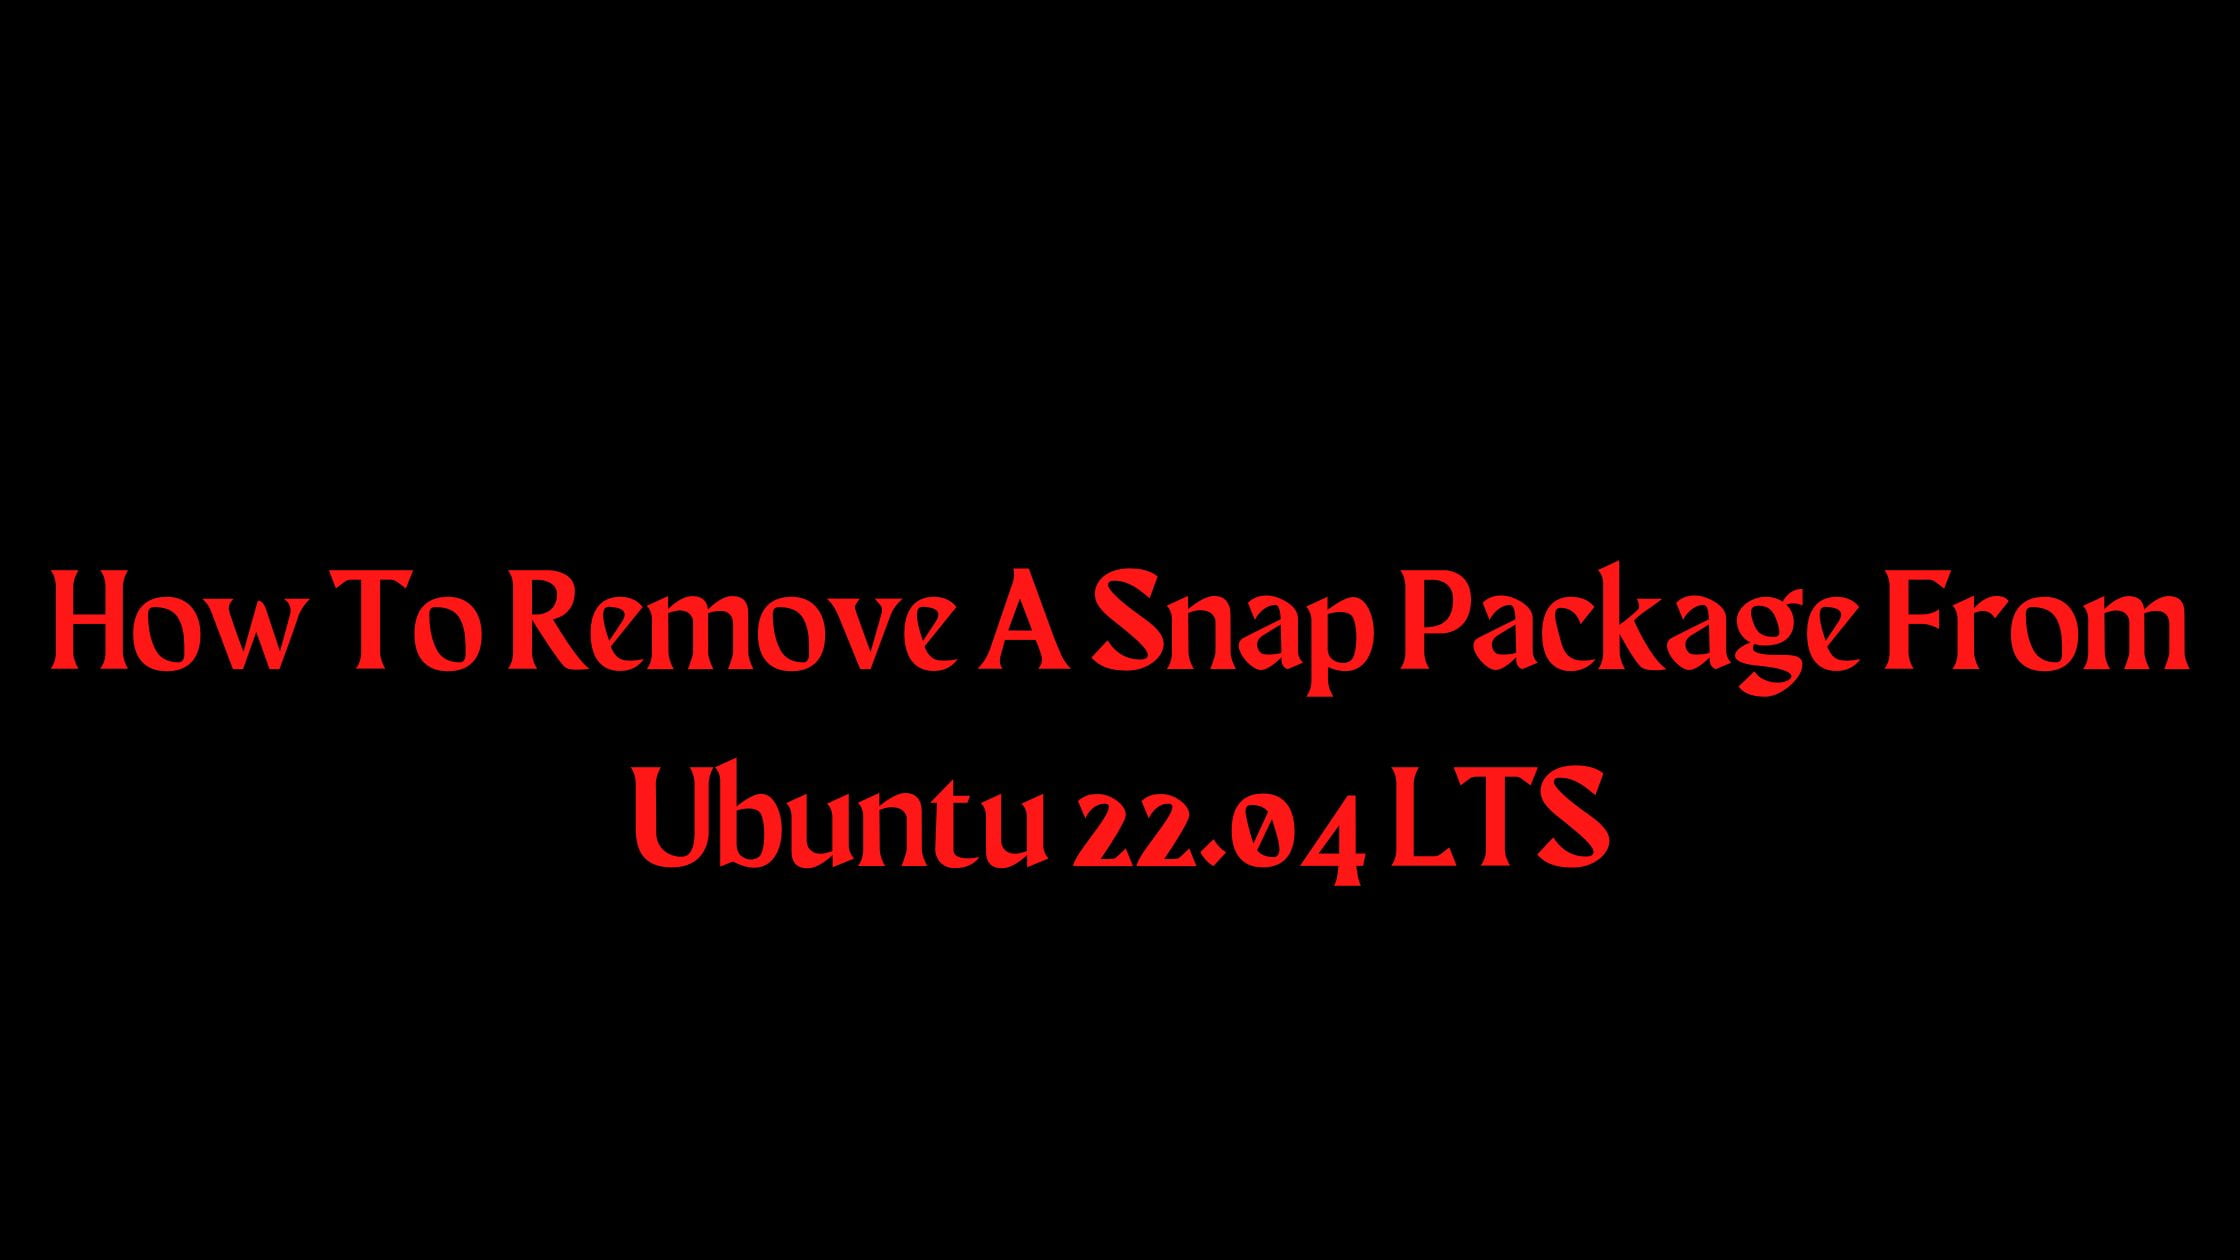 How To Remove A Snap Package From Ubuntu 22.04 LTS